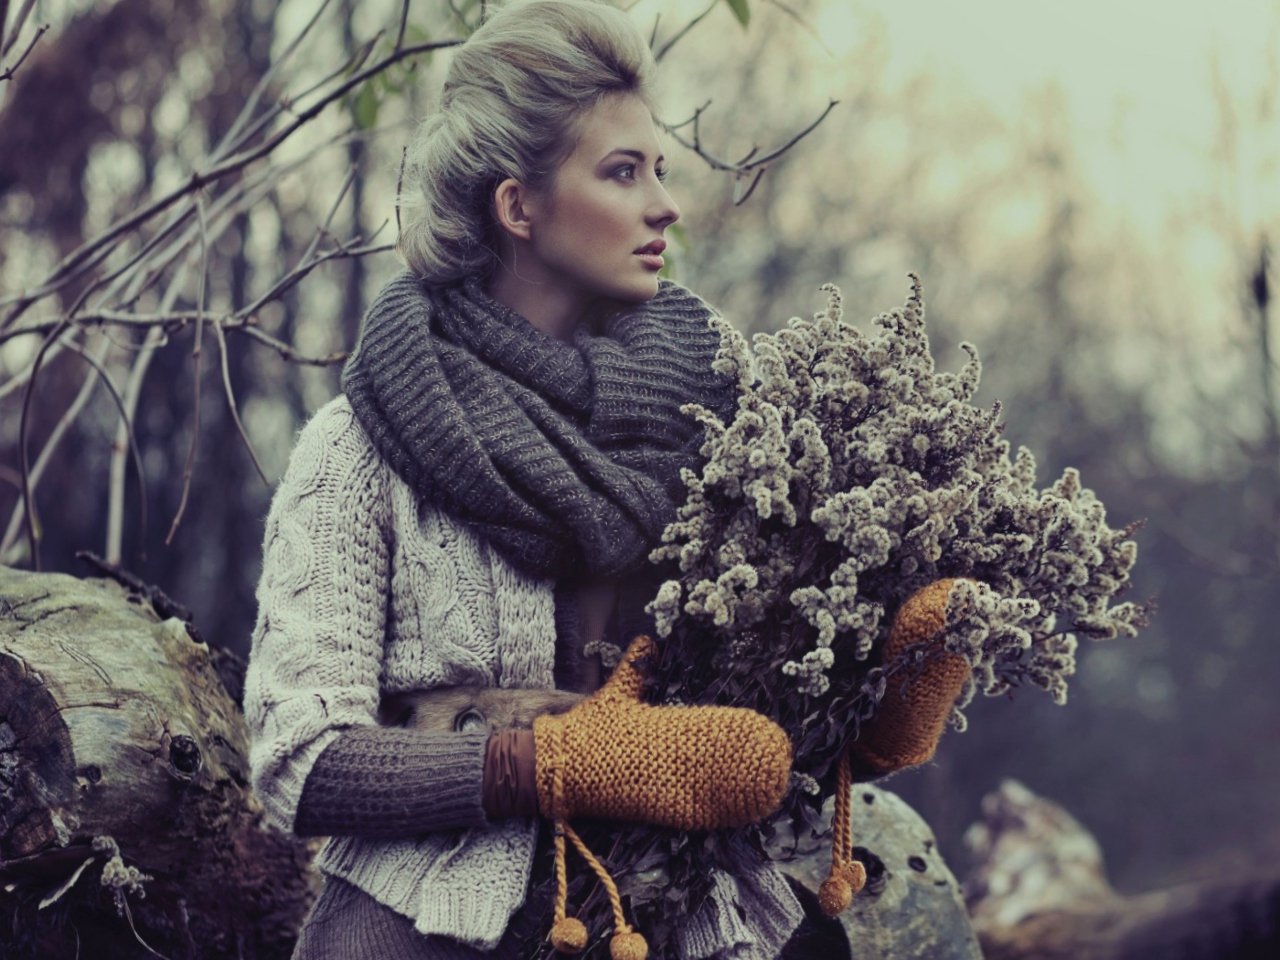 Girl With Winter Flowers Bouquet wallpaper 1280x960